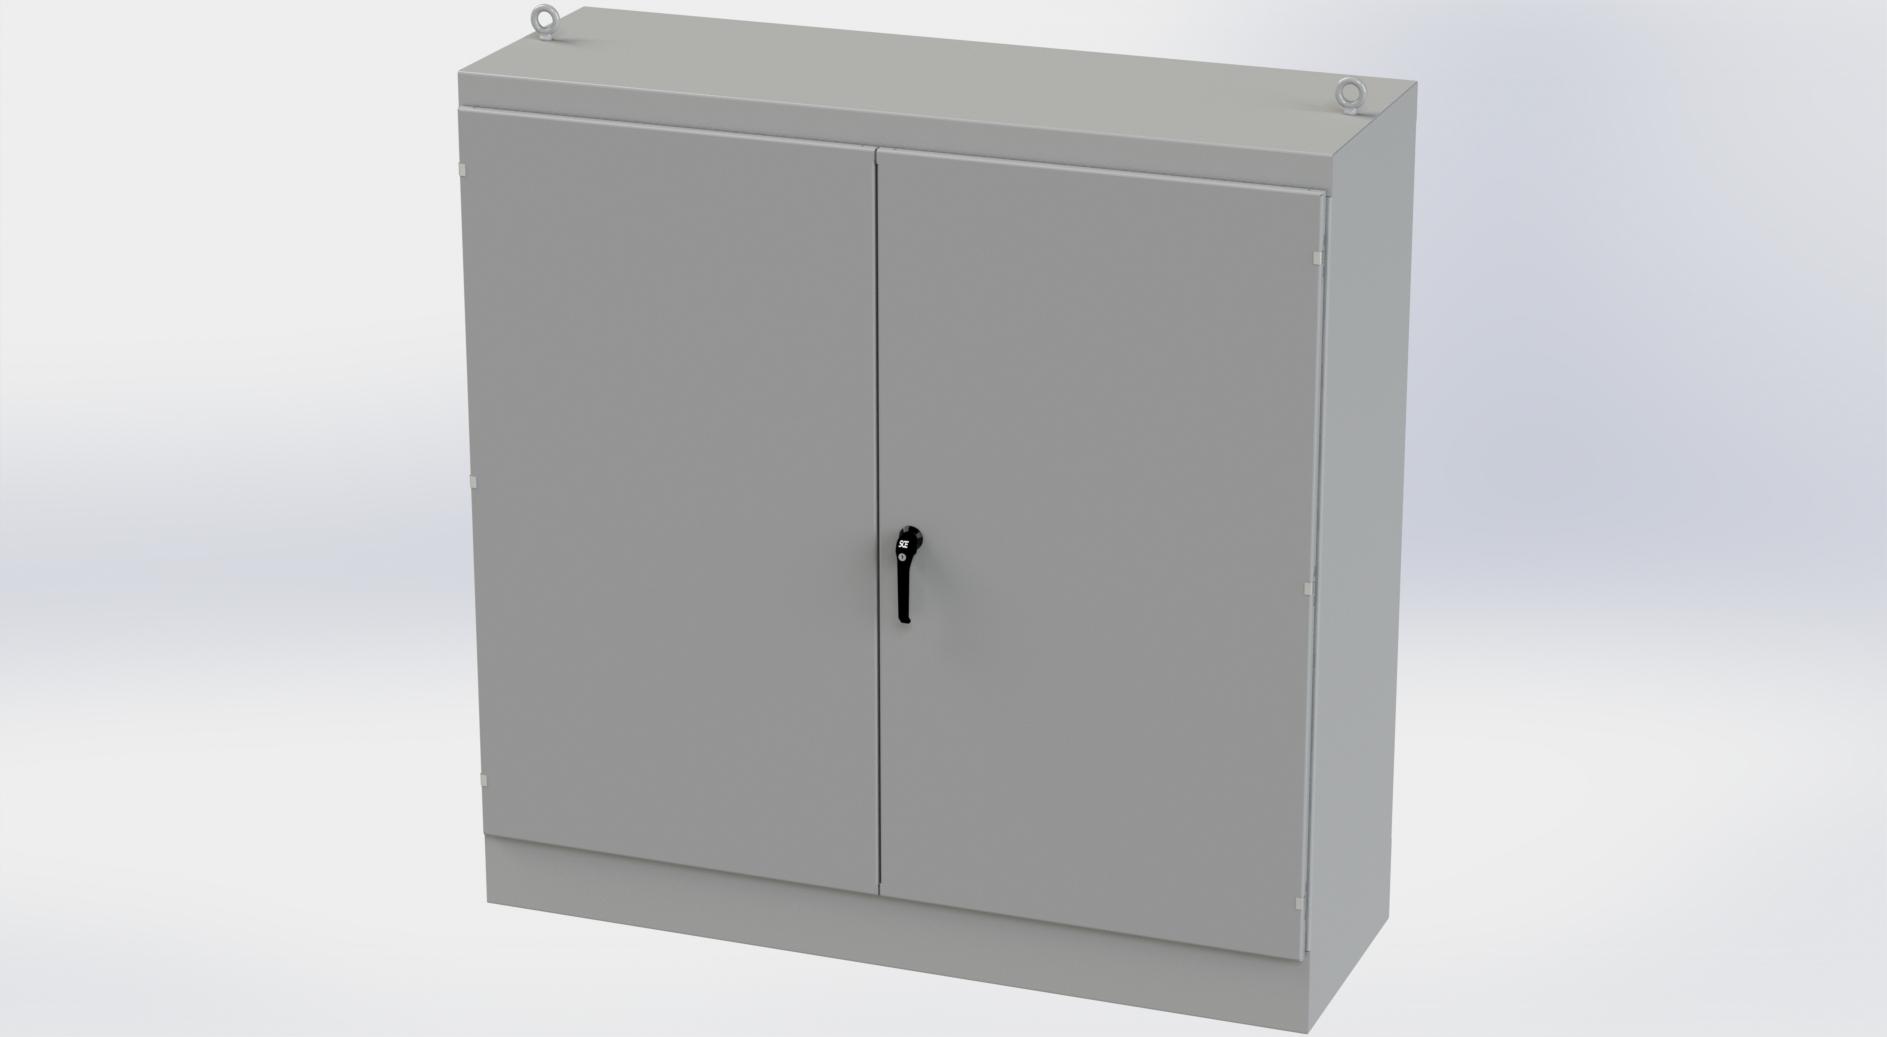 Saginaw Control SCE-727224FSDAD FSDAD Enclosure, Height:72.00", Width:72.00", Depth:24.00", ANSI-61 gray finish inside and out. Optional sub-panels are powder coated white.